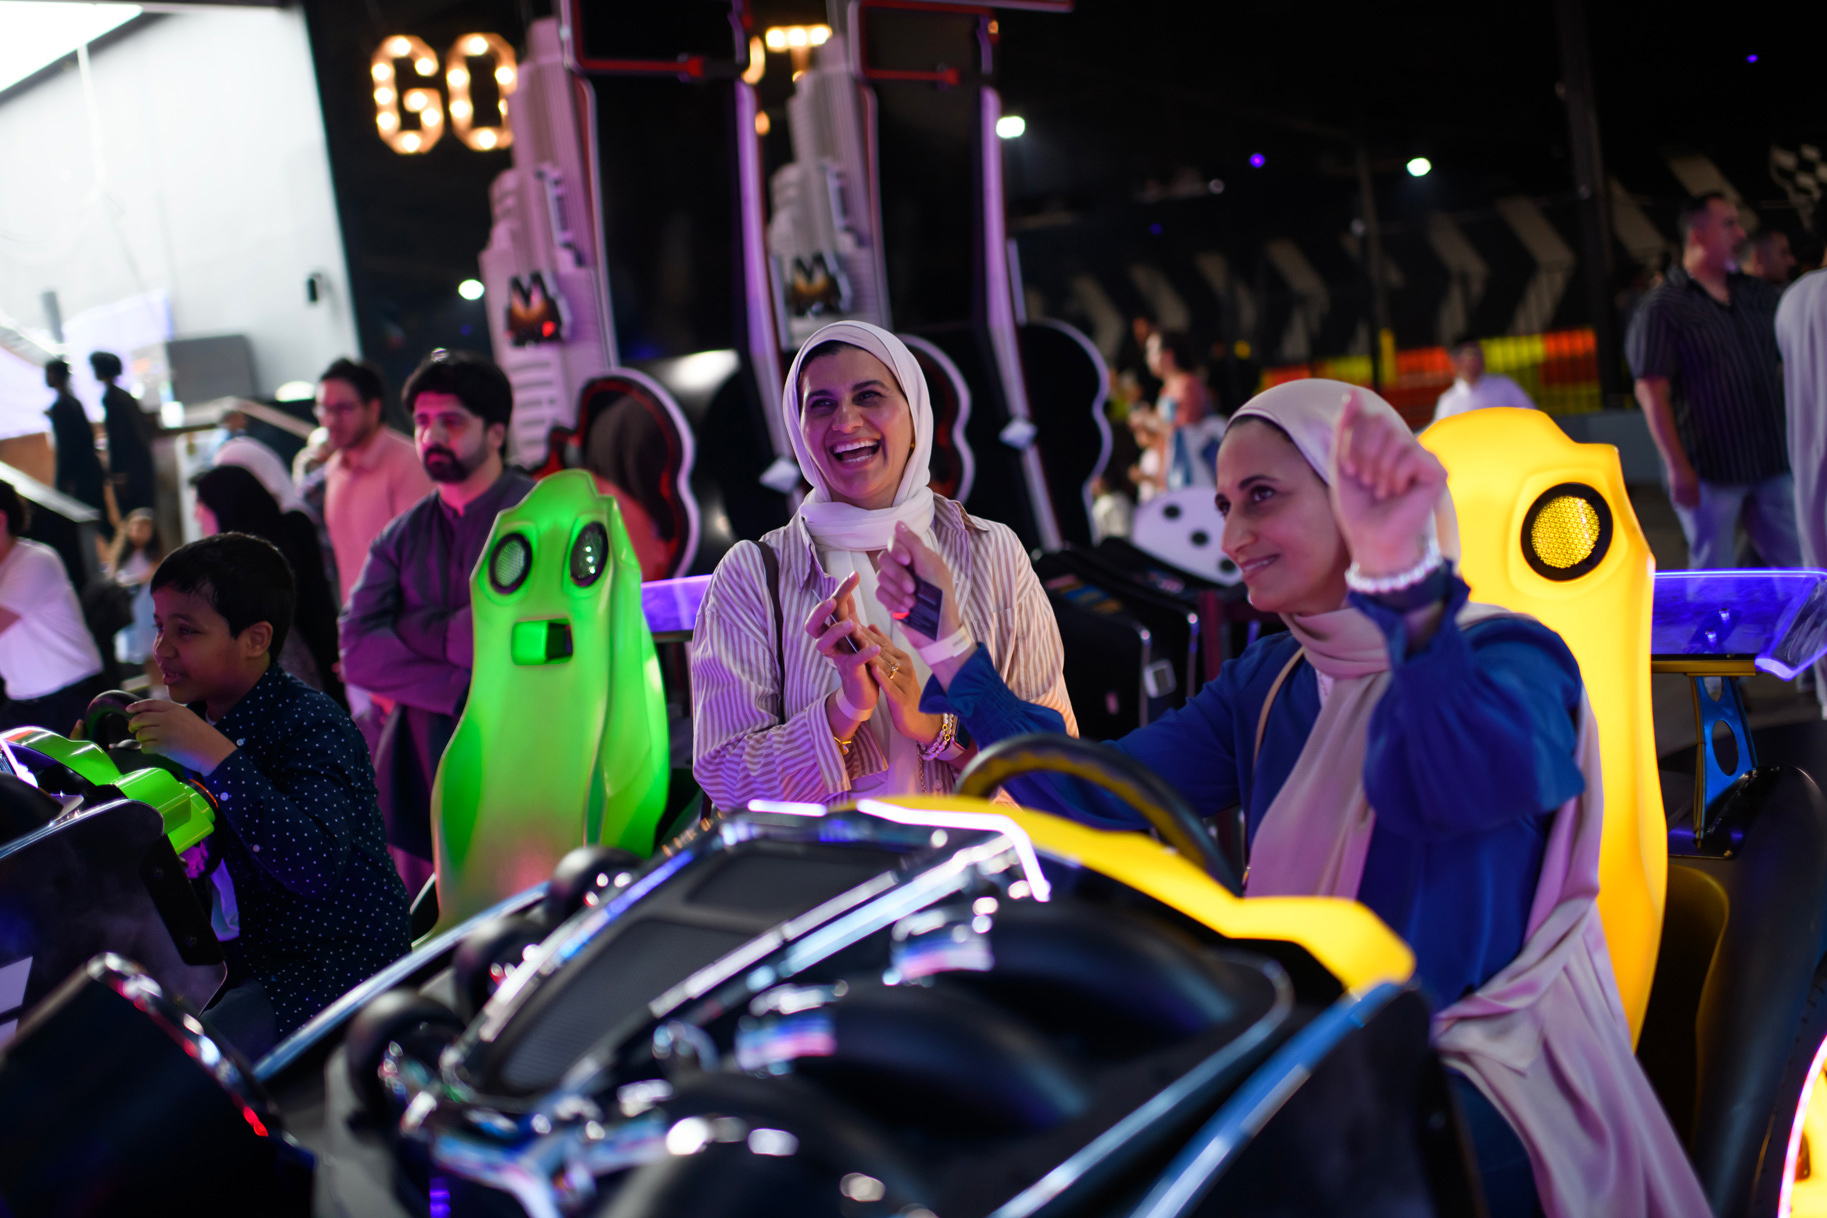 Nadiah Ammar (center) celebrates with her sister Yasmina Ammar (left) after driving a race car during an arcade game at an Eid celebration held by the Clear Lake Islamic Center at Marquee at the Mainland